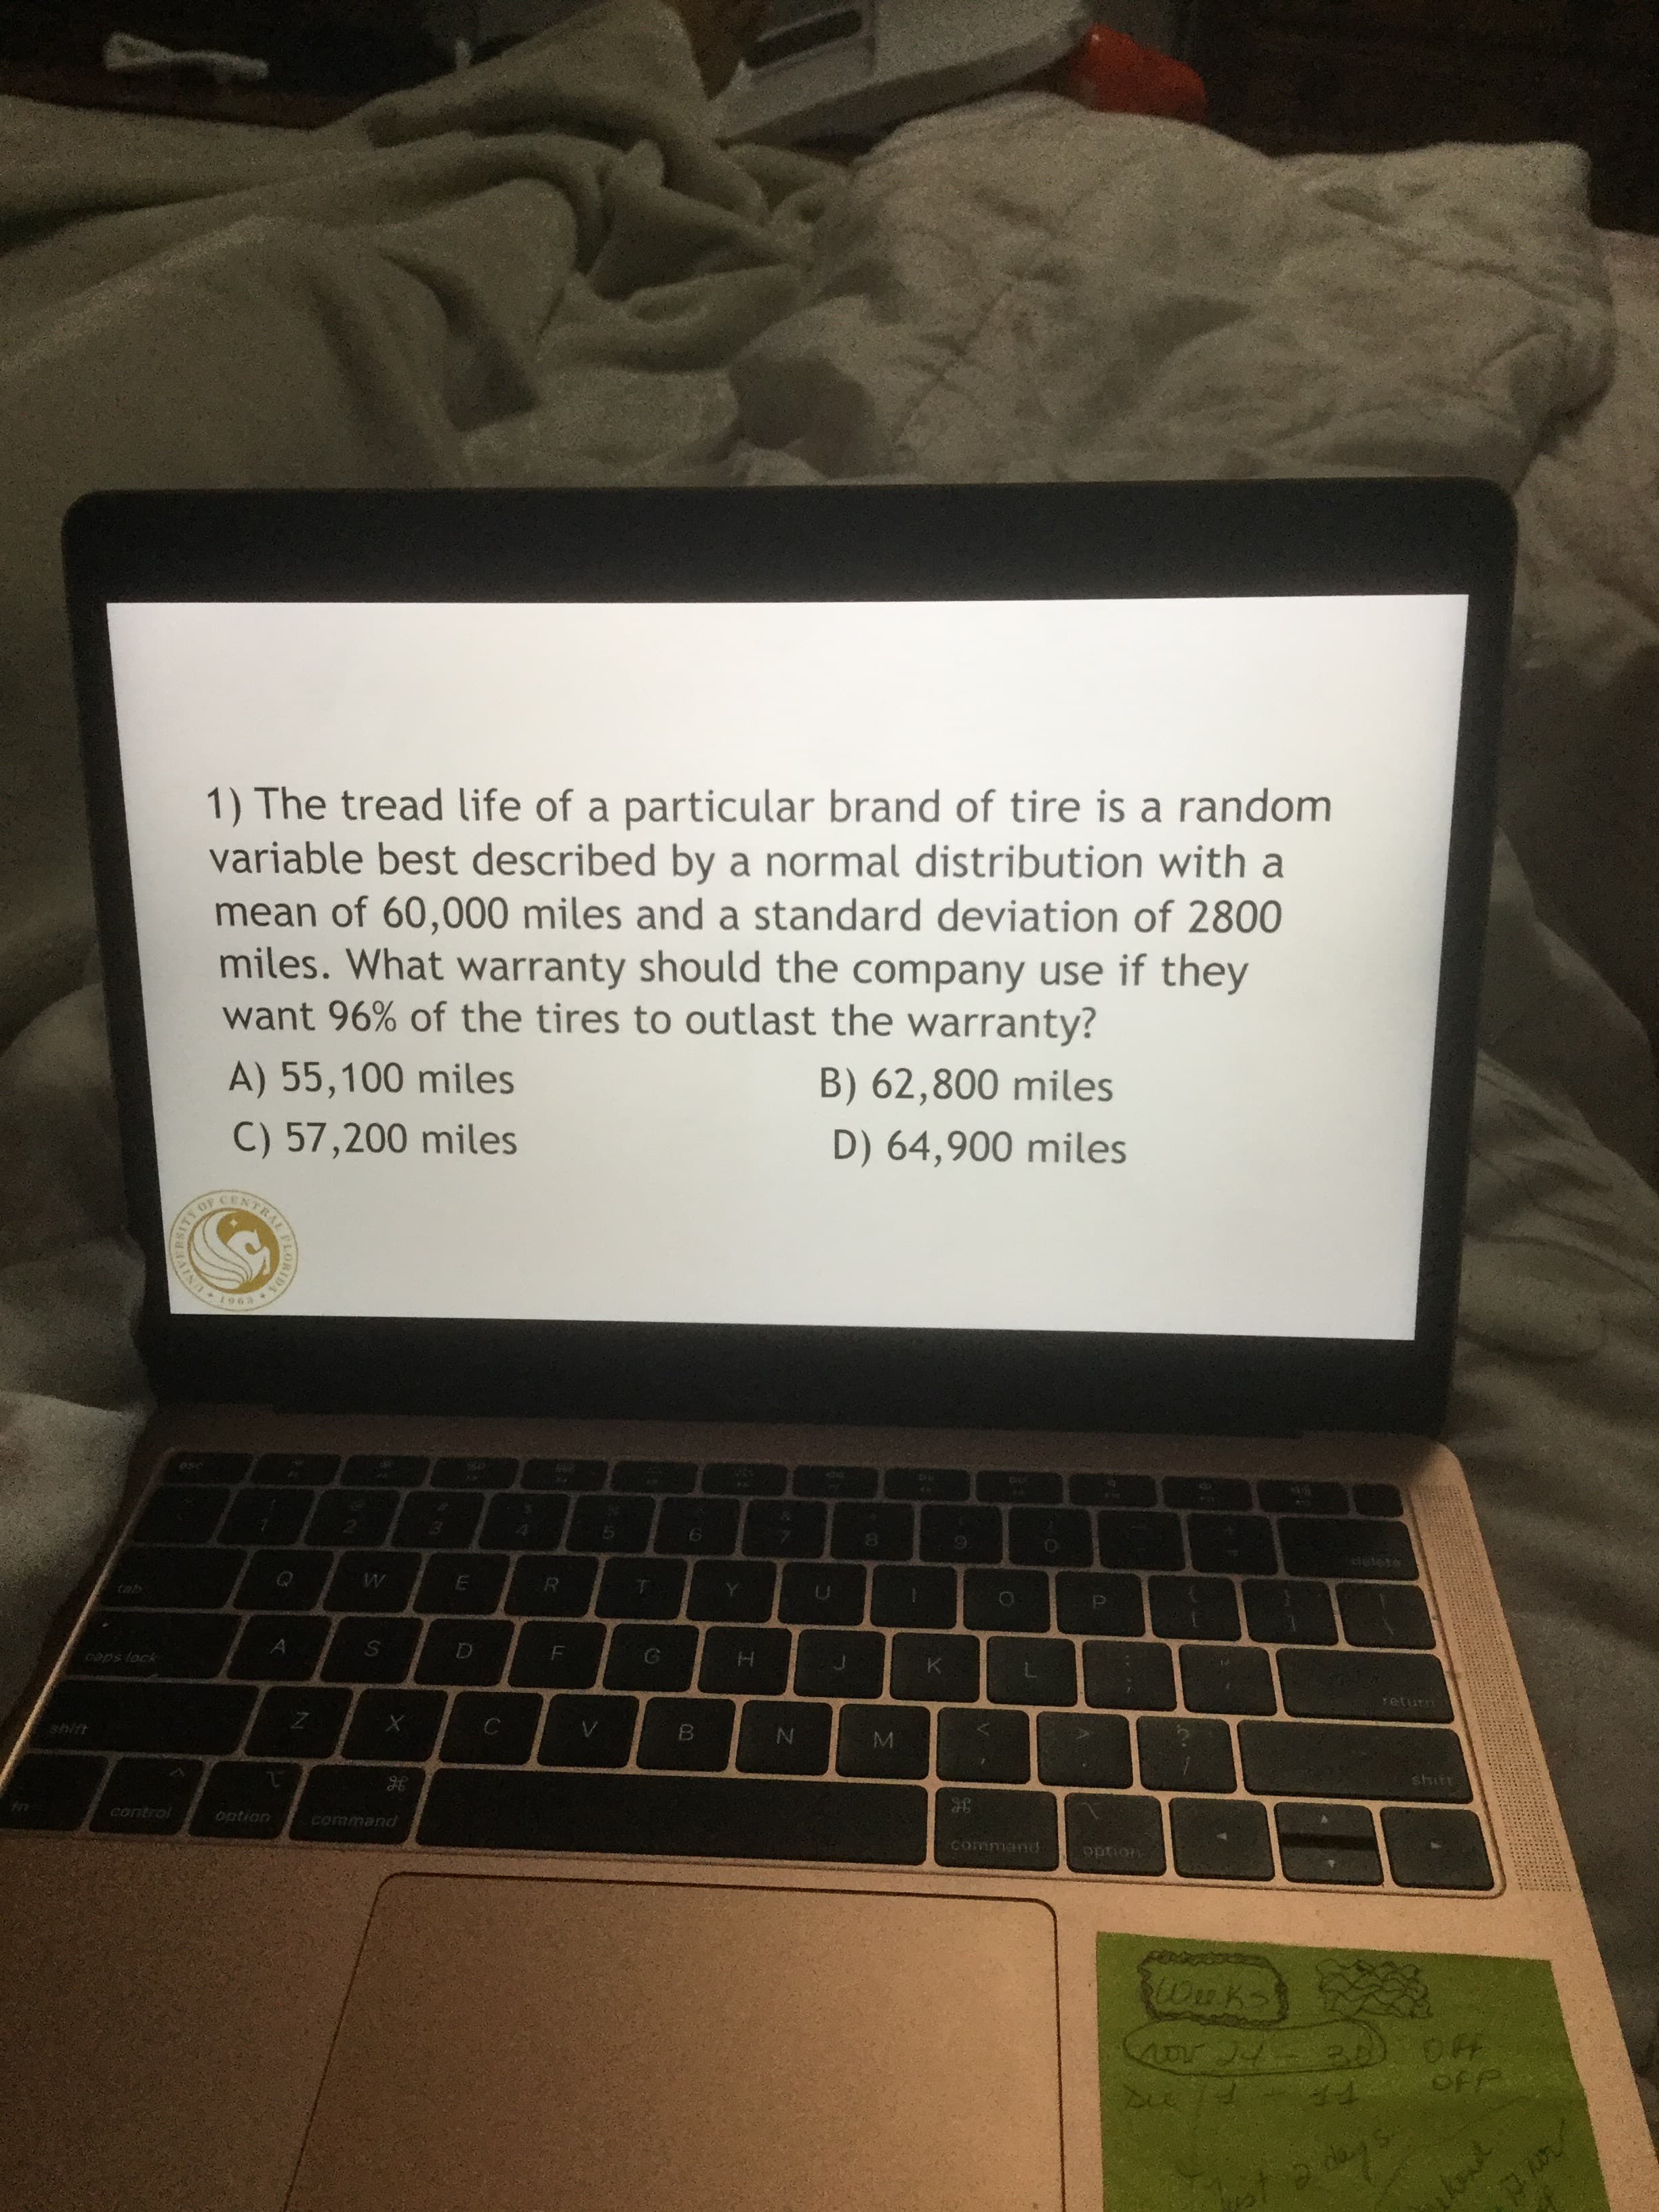 1) The tread life of a particular brand of tire is a random
variable best described by a normal distribution with a
mean of 60,000 miles and a standard deviation of 2800
miles. What warranty should the company use if they
want 96% of the tires to outlast the warranty?
A) 55,100 miles
B) 62,800 miles
C) 57,200 miles
D) 64,900 miles
850
Getete
tab
taps lock
K.
retur
shitt
stuft:
control
option
command
Command
option
OFF
da
TRALMLORIDA
AINDY
